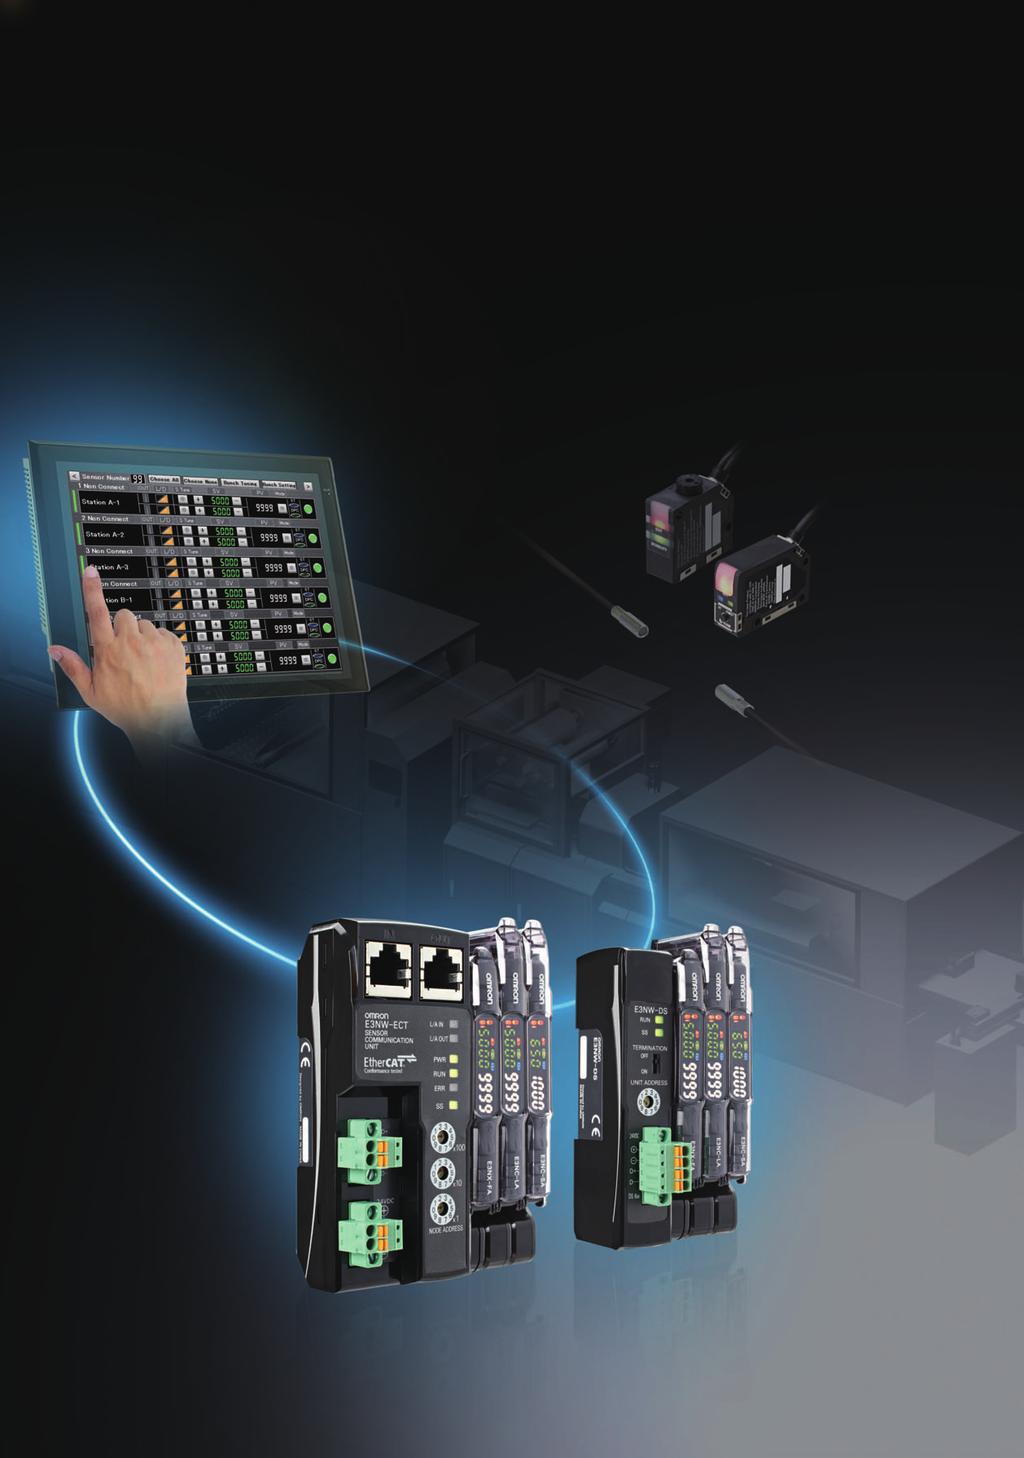 NEW E3NW Revolutionize the Workplace Introducing the Next-generation E3NW Sensor Networking Units